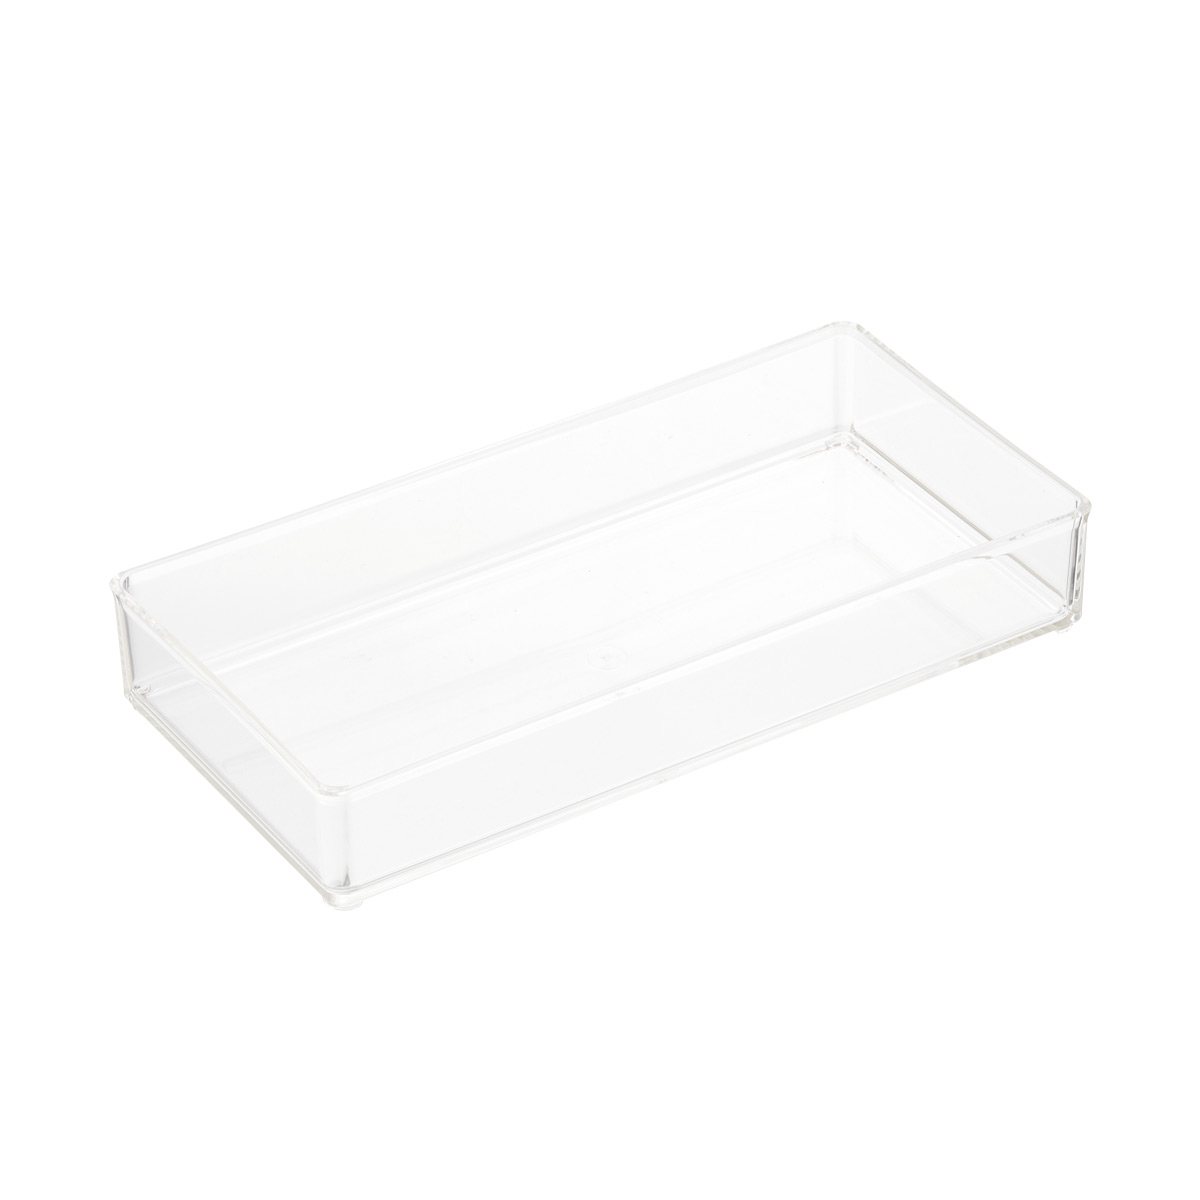 https://www.containerstore.com/catalogimages/340609/10074297-stacking-drawer-organizer-a.jpg